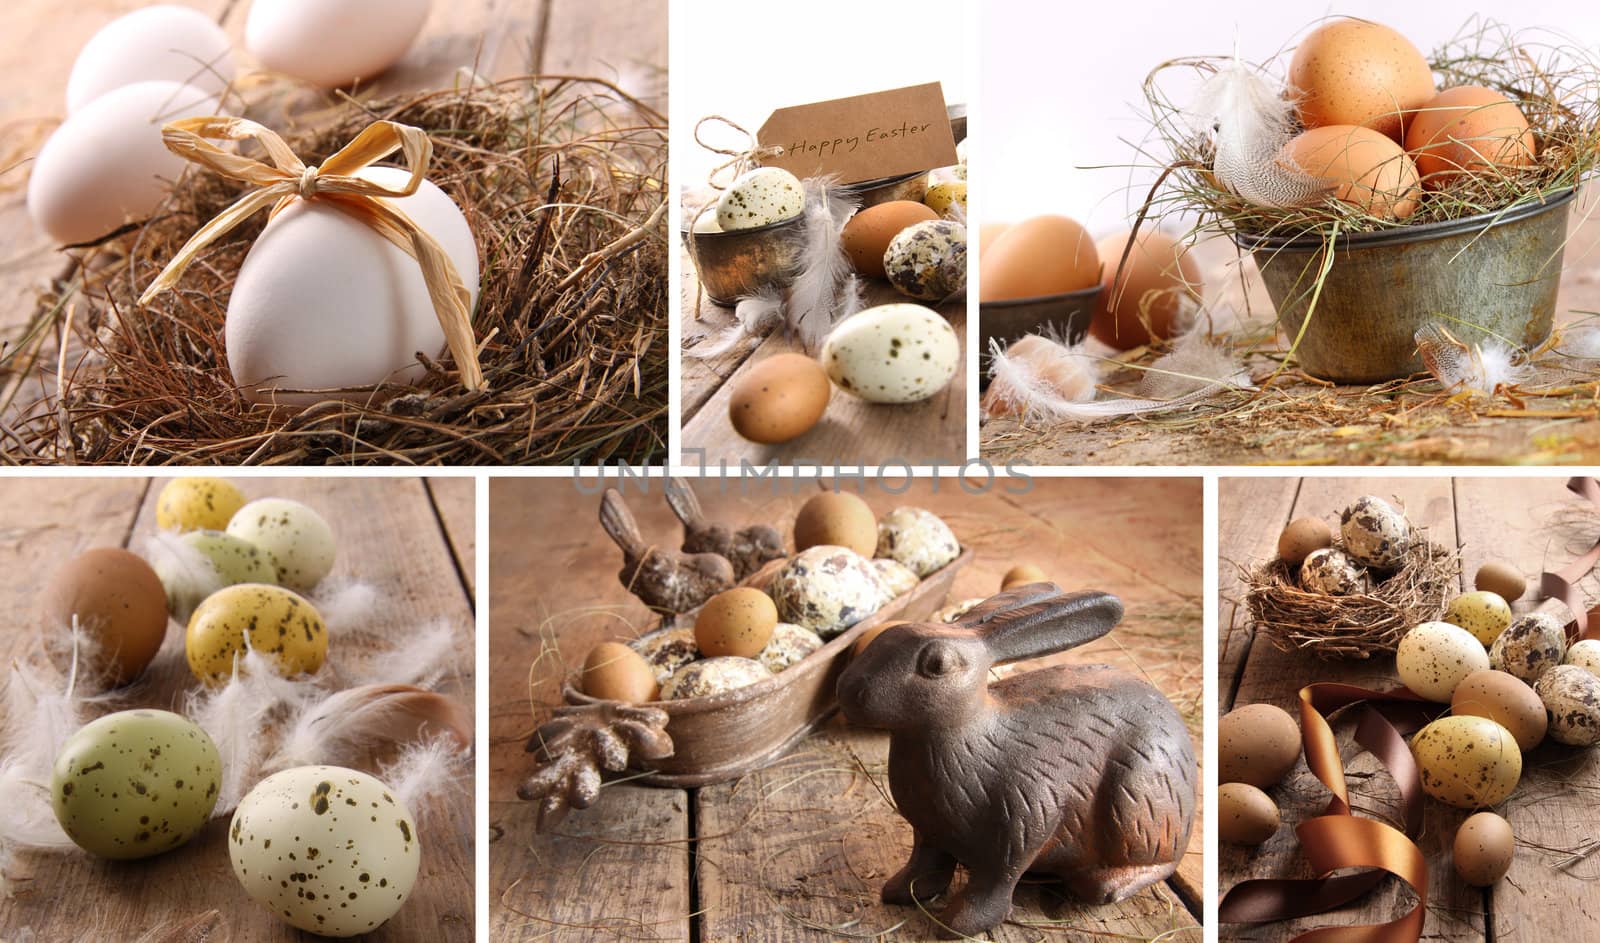 Collage of assorted brown eggs images for easter by Sandralise